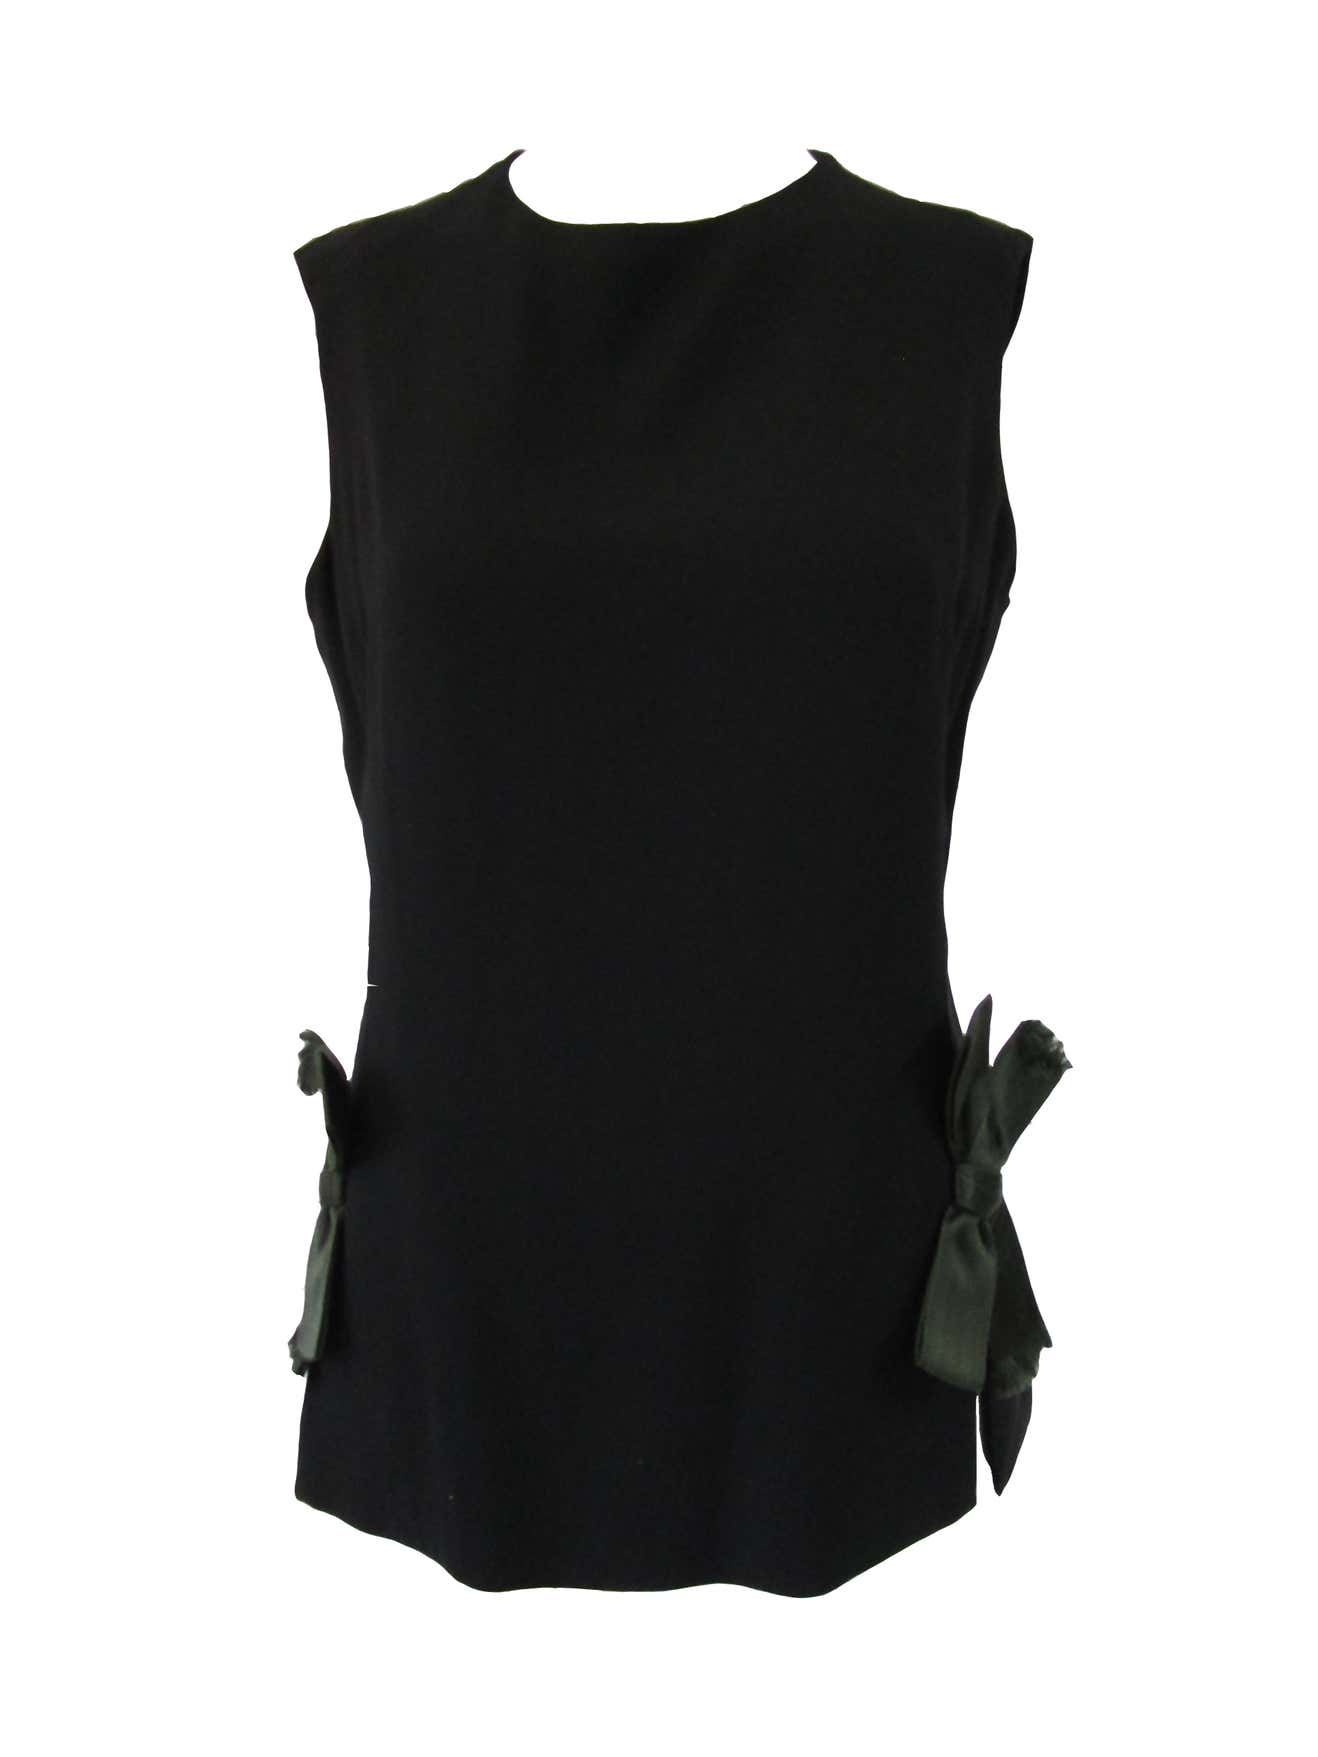 1960s Geoffrey Beene Black Silk Top with Green Bows - MRS Couture